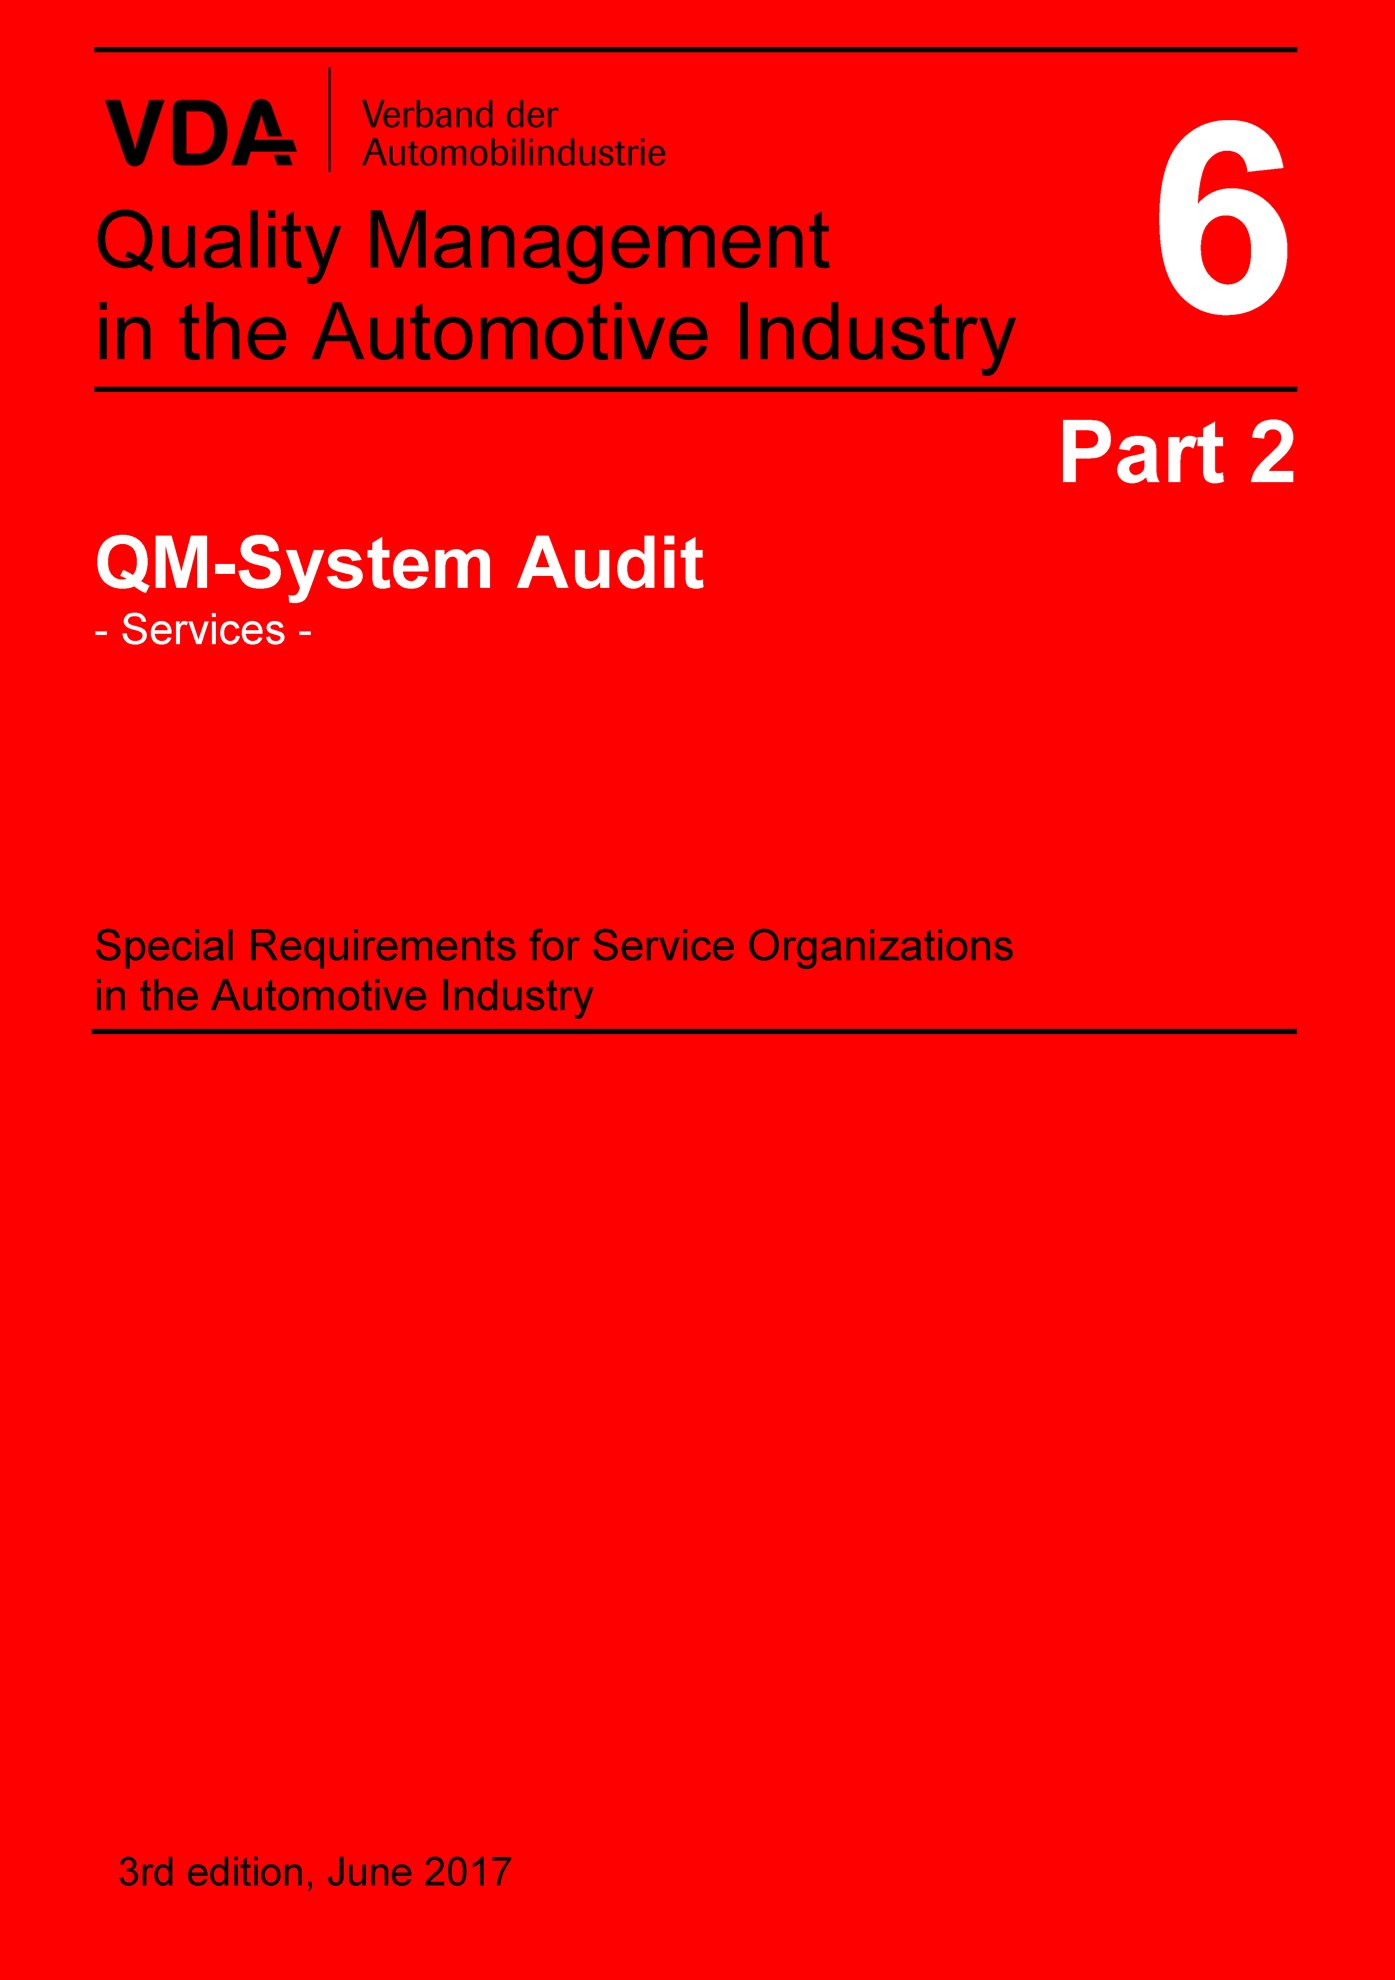 Publikation  VDA Volume 6 Part 2_QM System Audit - Services -
 Special Requirements for Service Organizations in the Automotive Industry
 3rd Edition, June 2017 1.6.2017 Ansicht